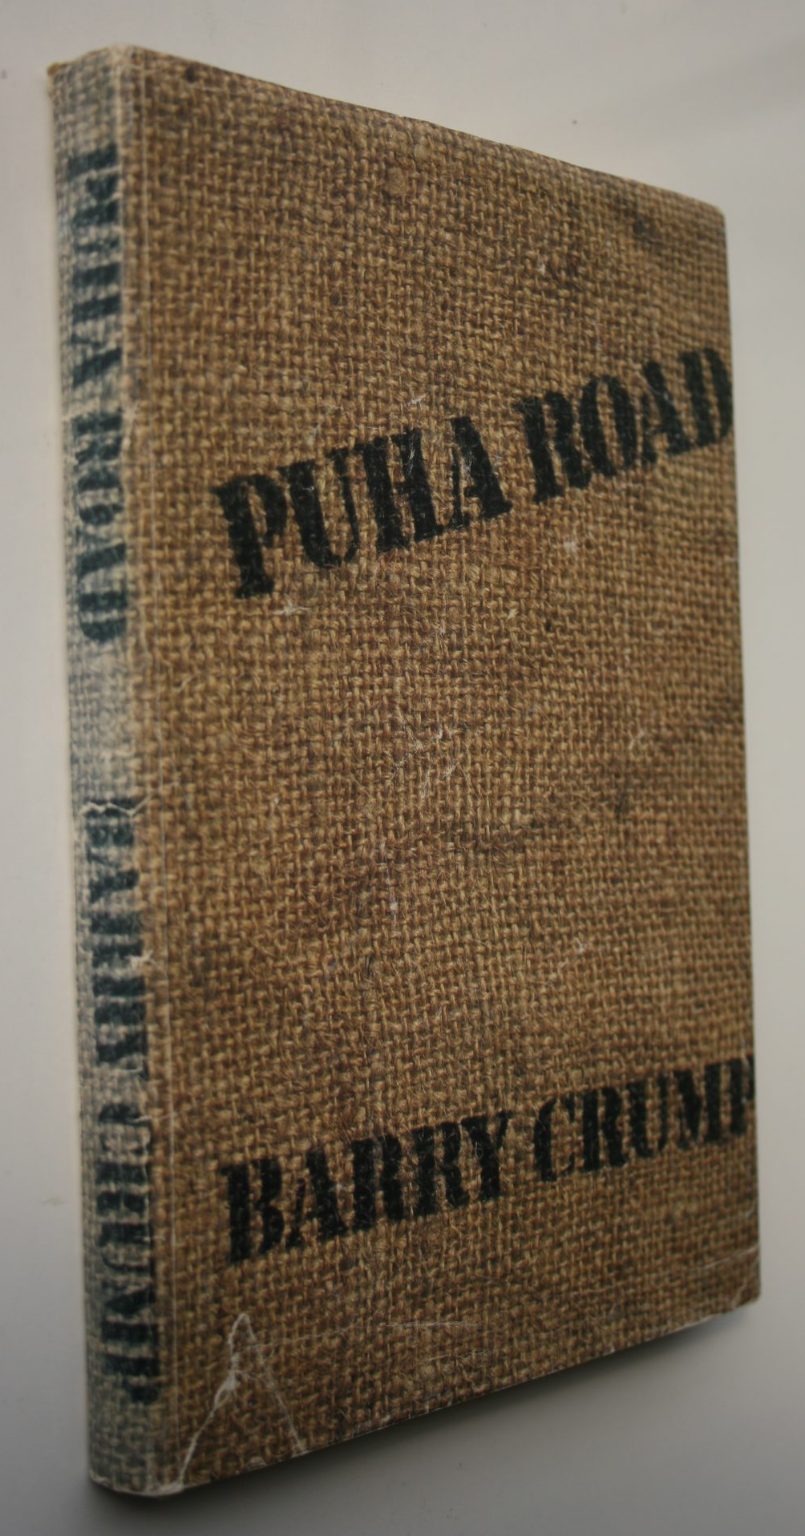 Puha Road by Barry Crump. First Edition.